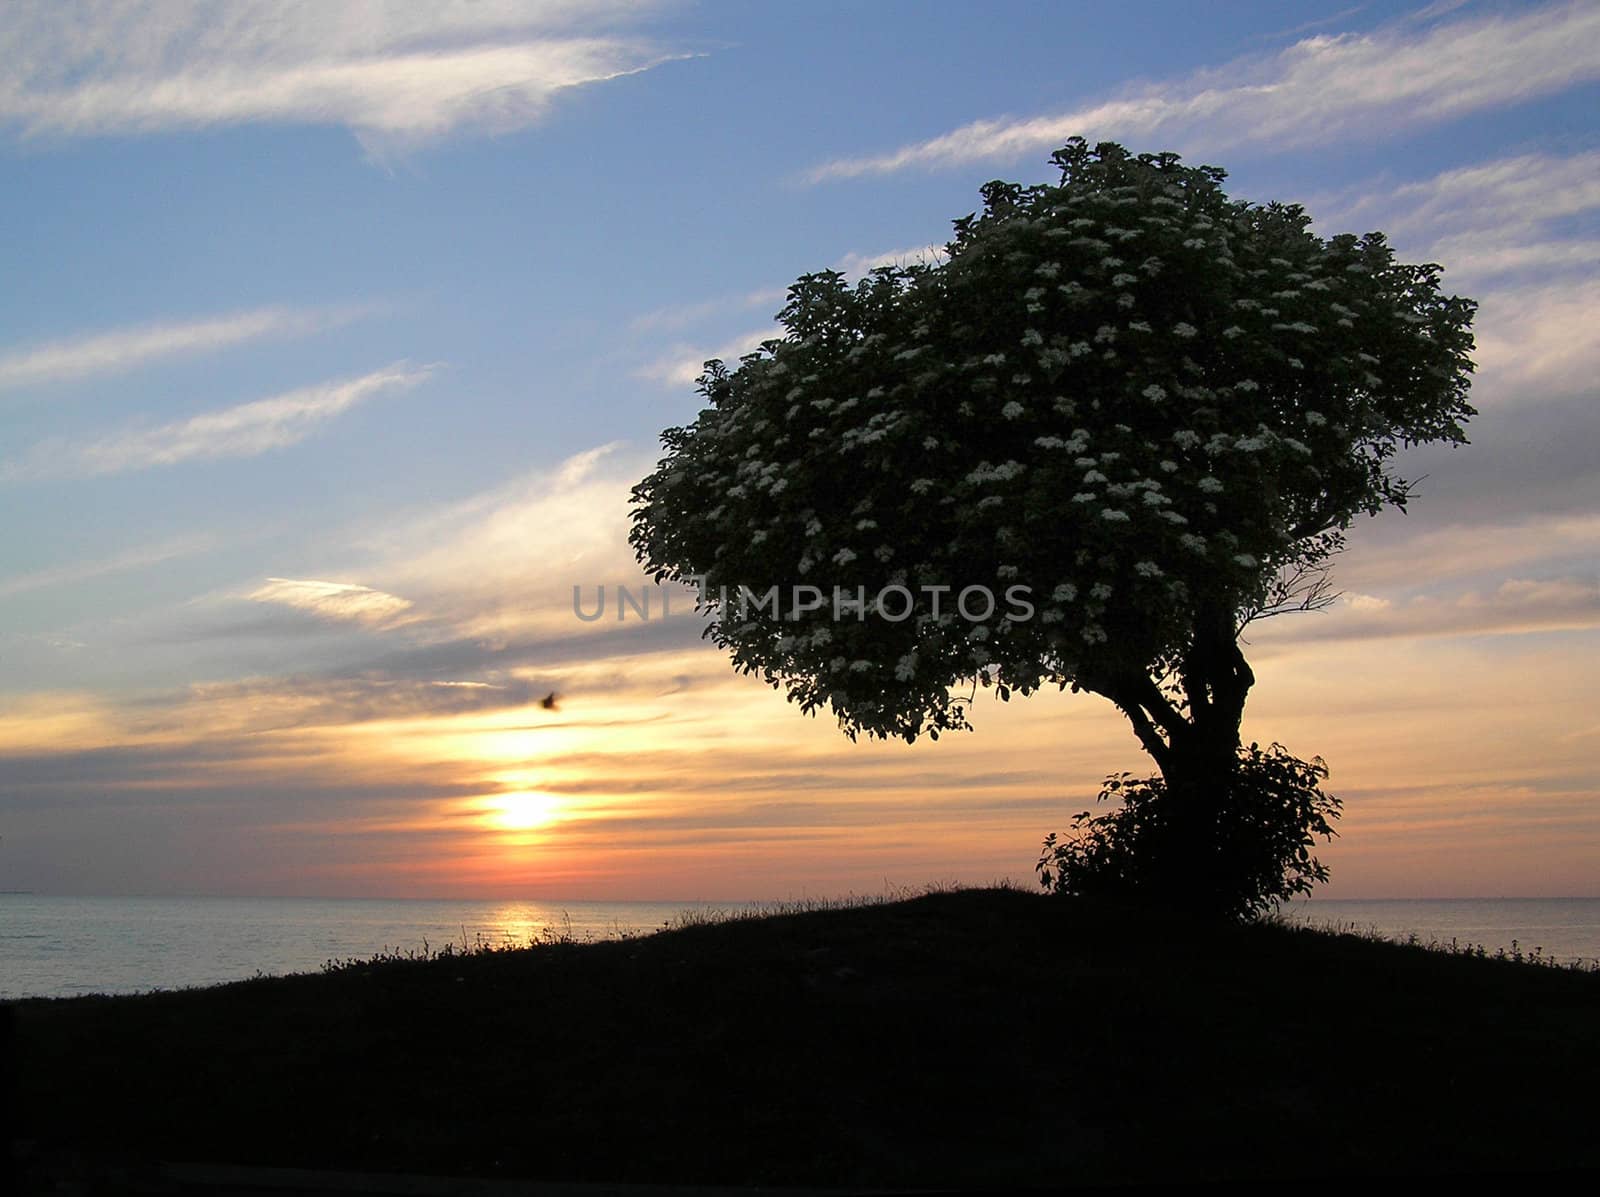 Beautiful tree silhouette with sunset background.